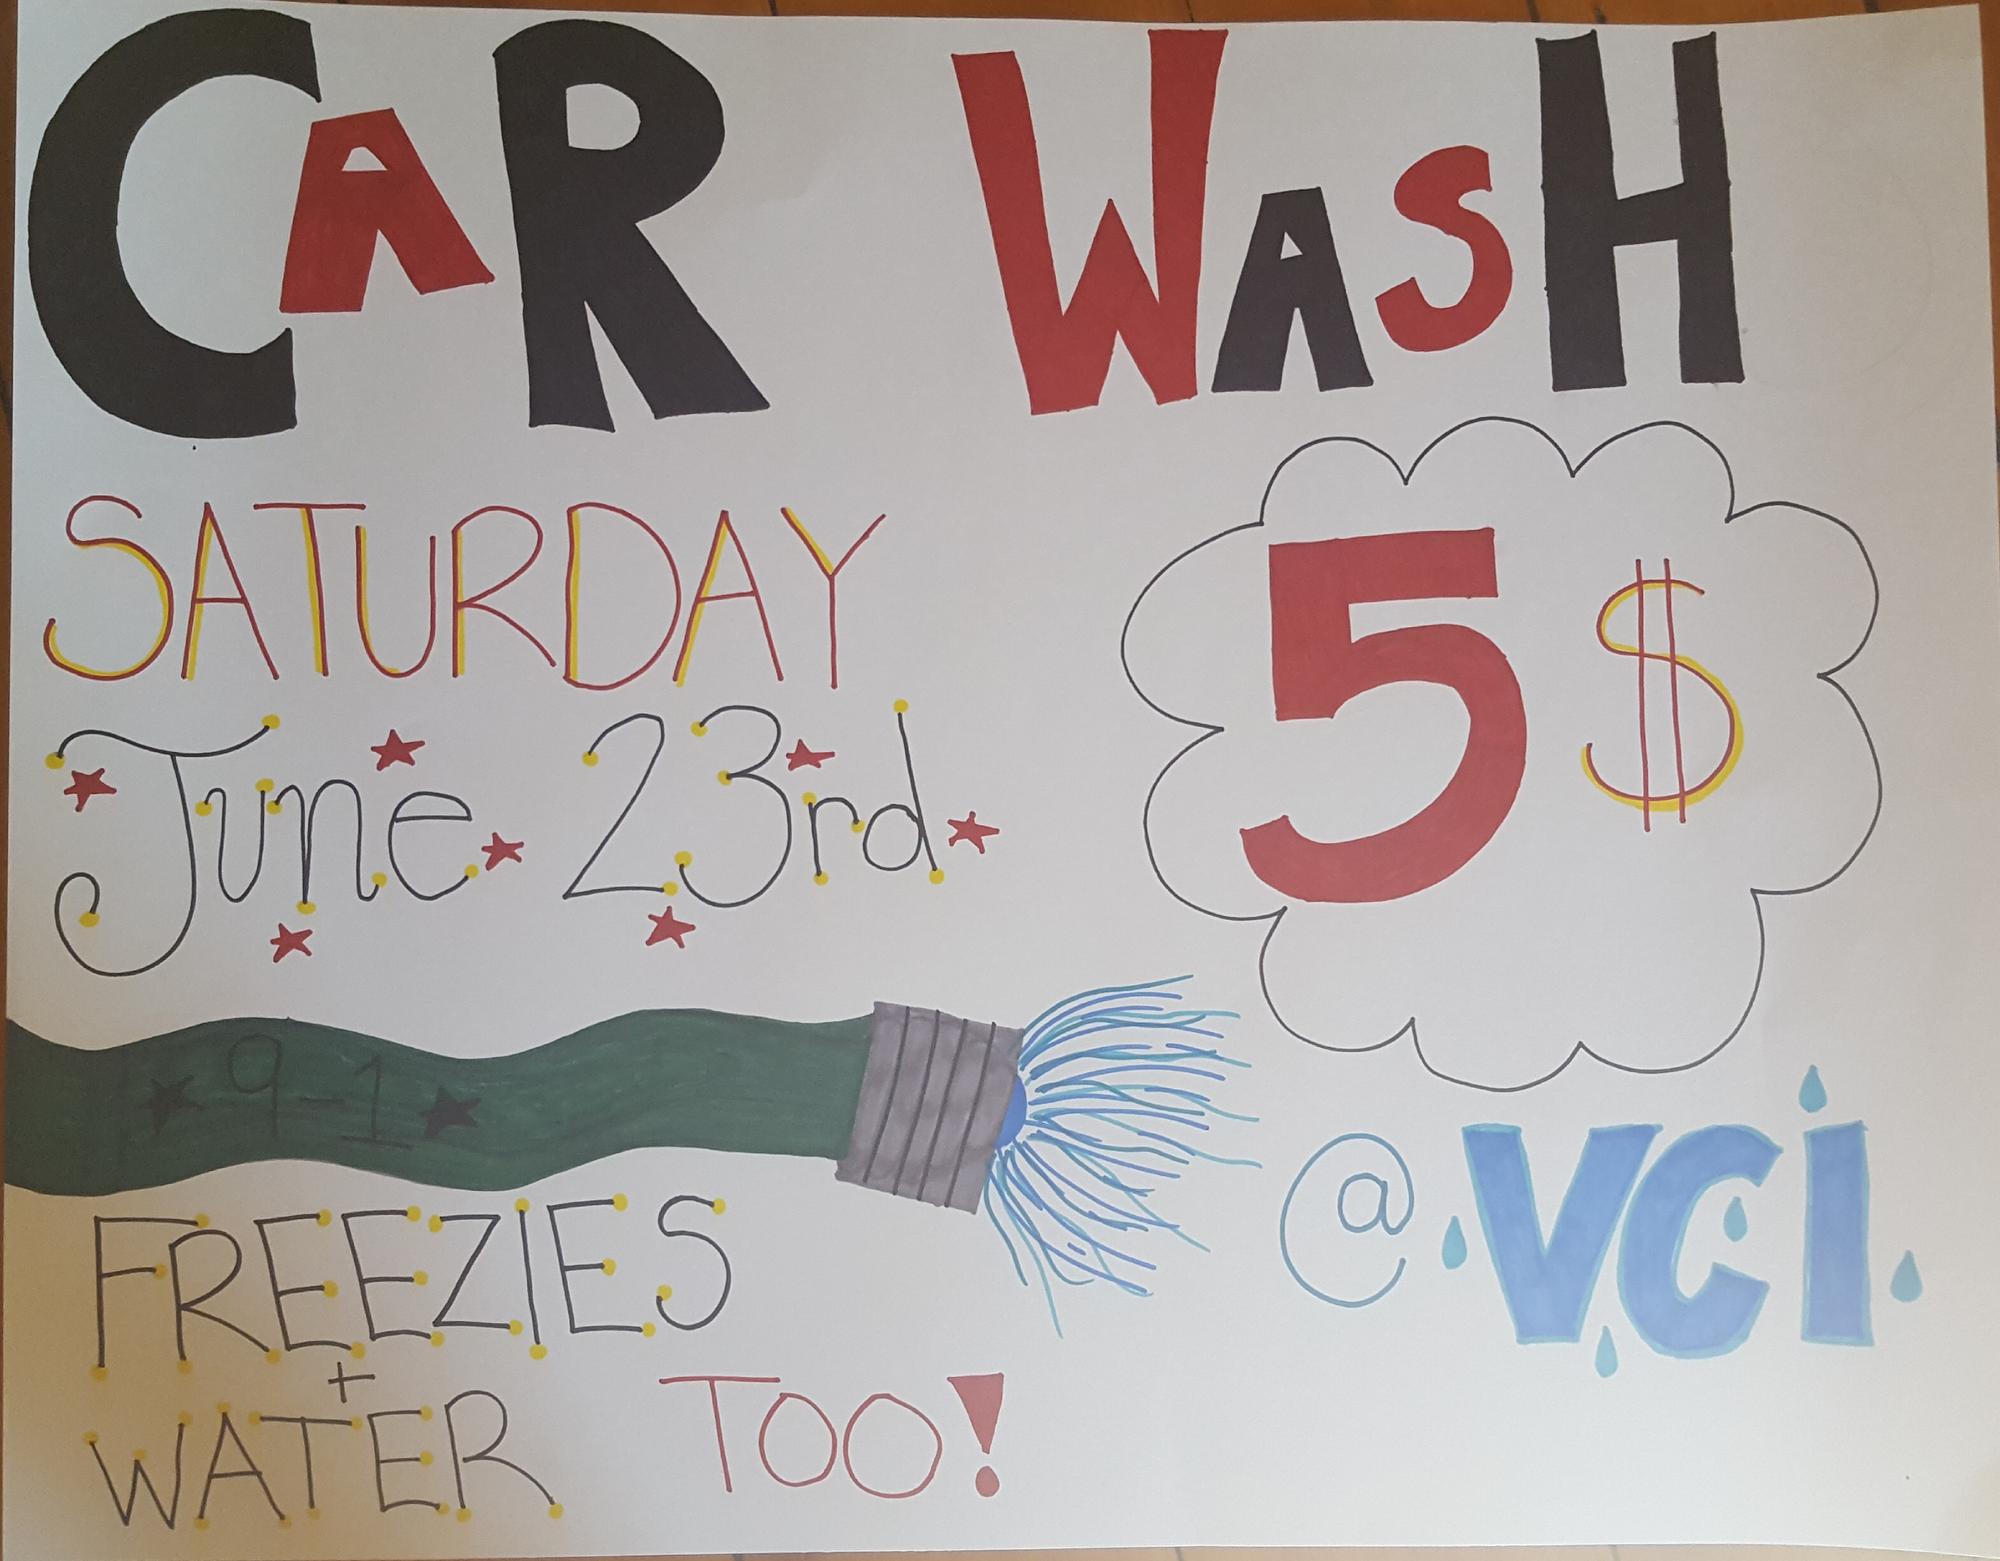 Fundraiser car wash for VCI, PCPS on June 23